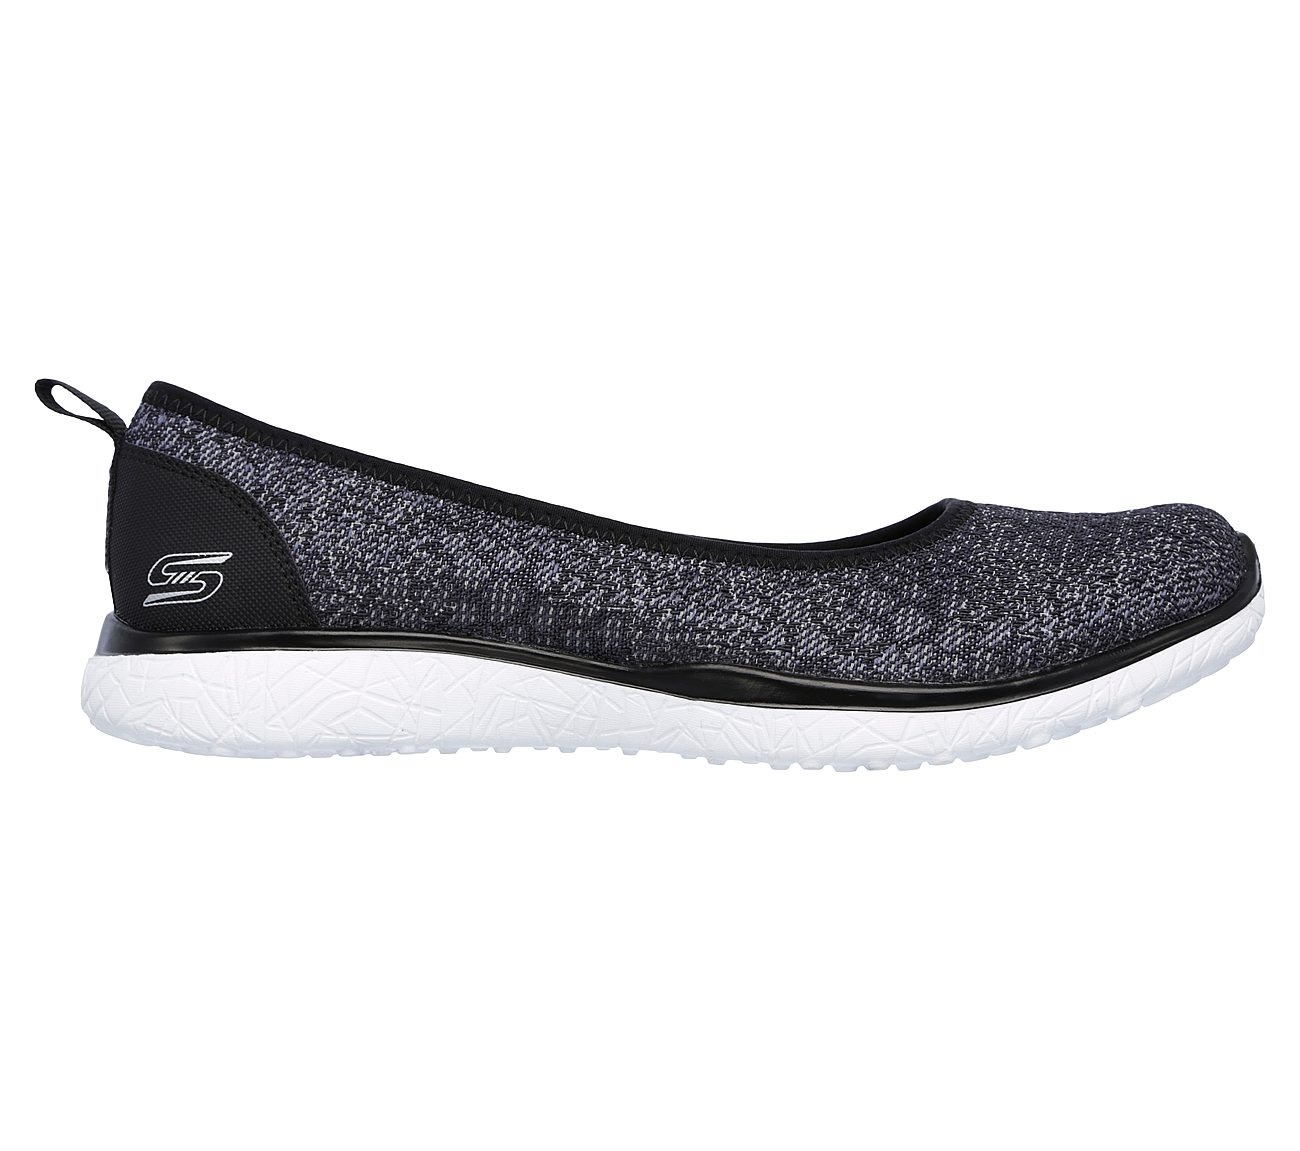 Hyped Up SKECHERS Sport Active Shoes